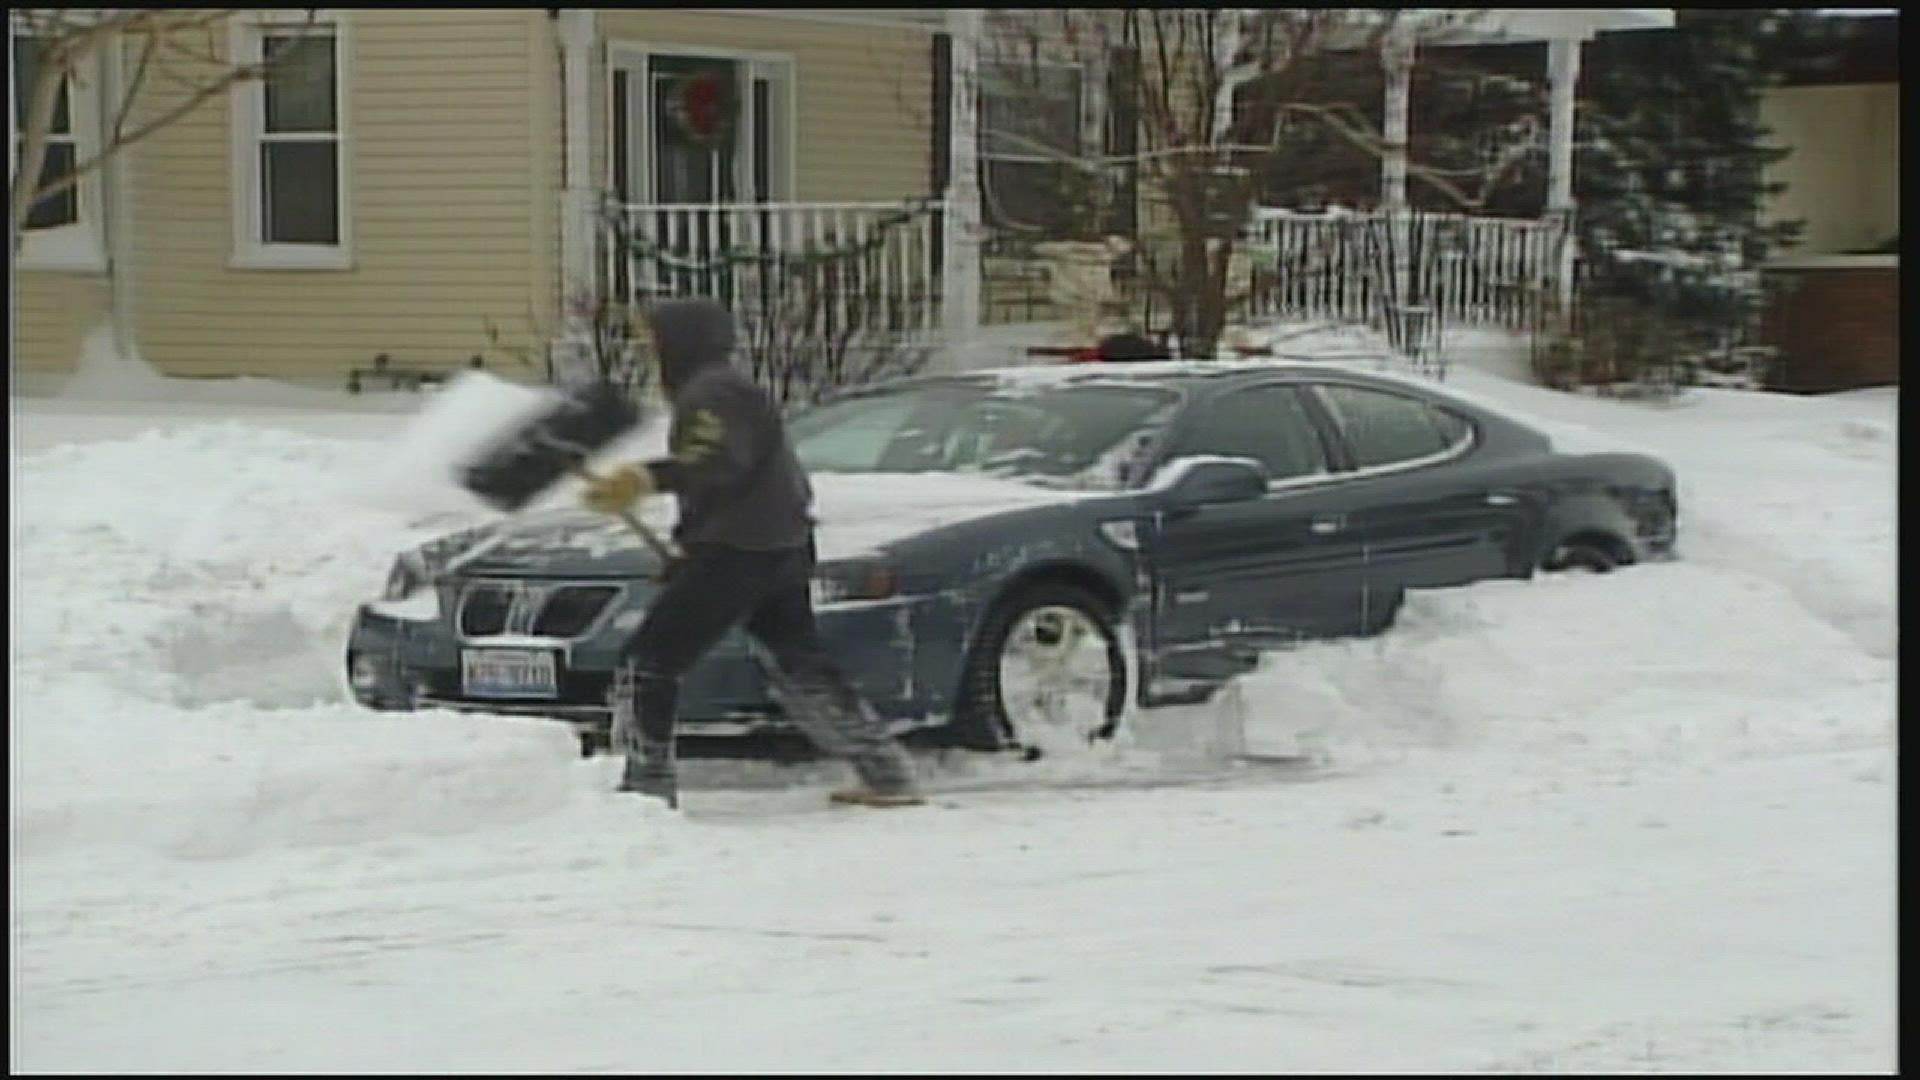 After 18 inches of snow fell in three days time in early February 2011, neighbors banded together to clear driveways and free cars.